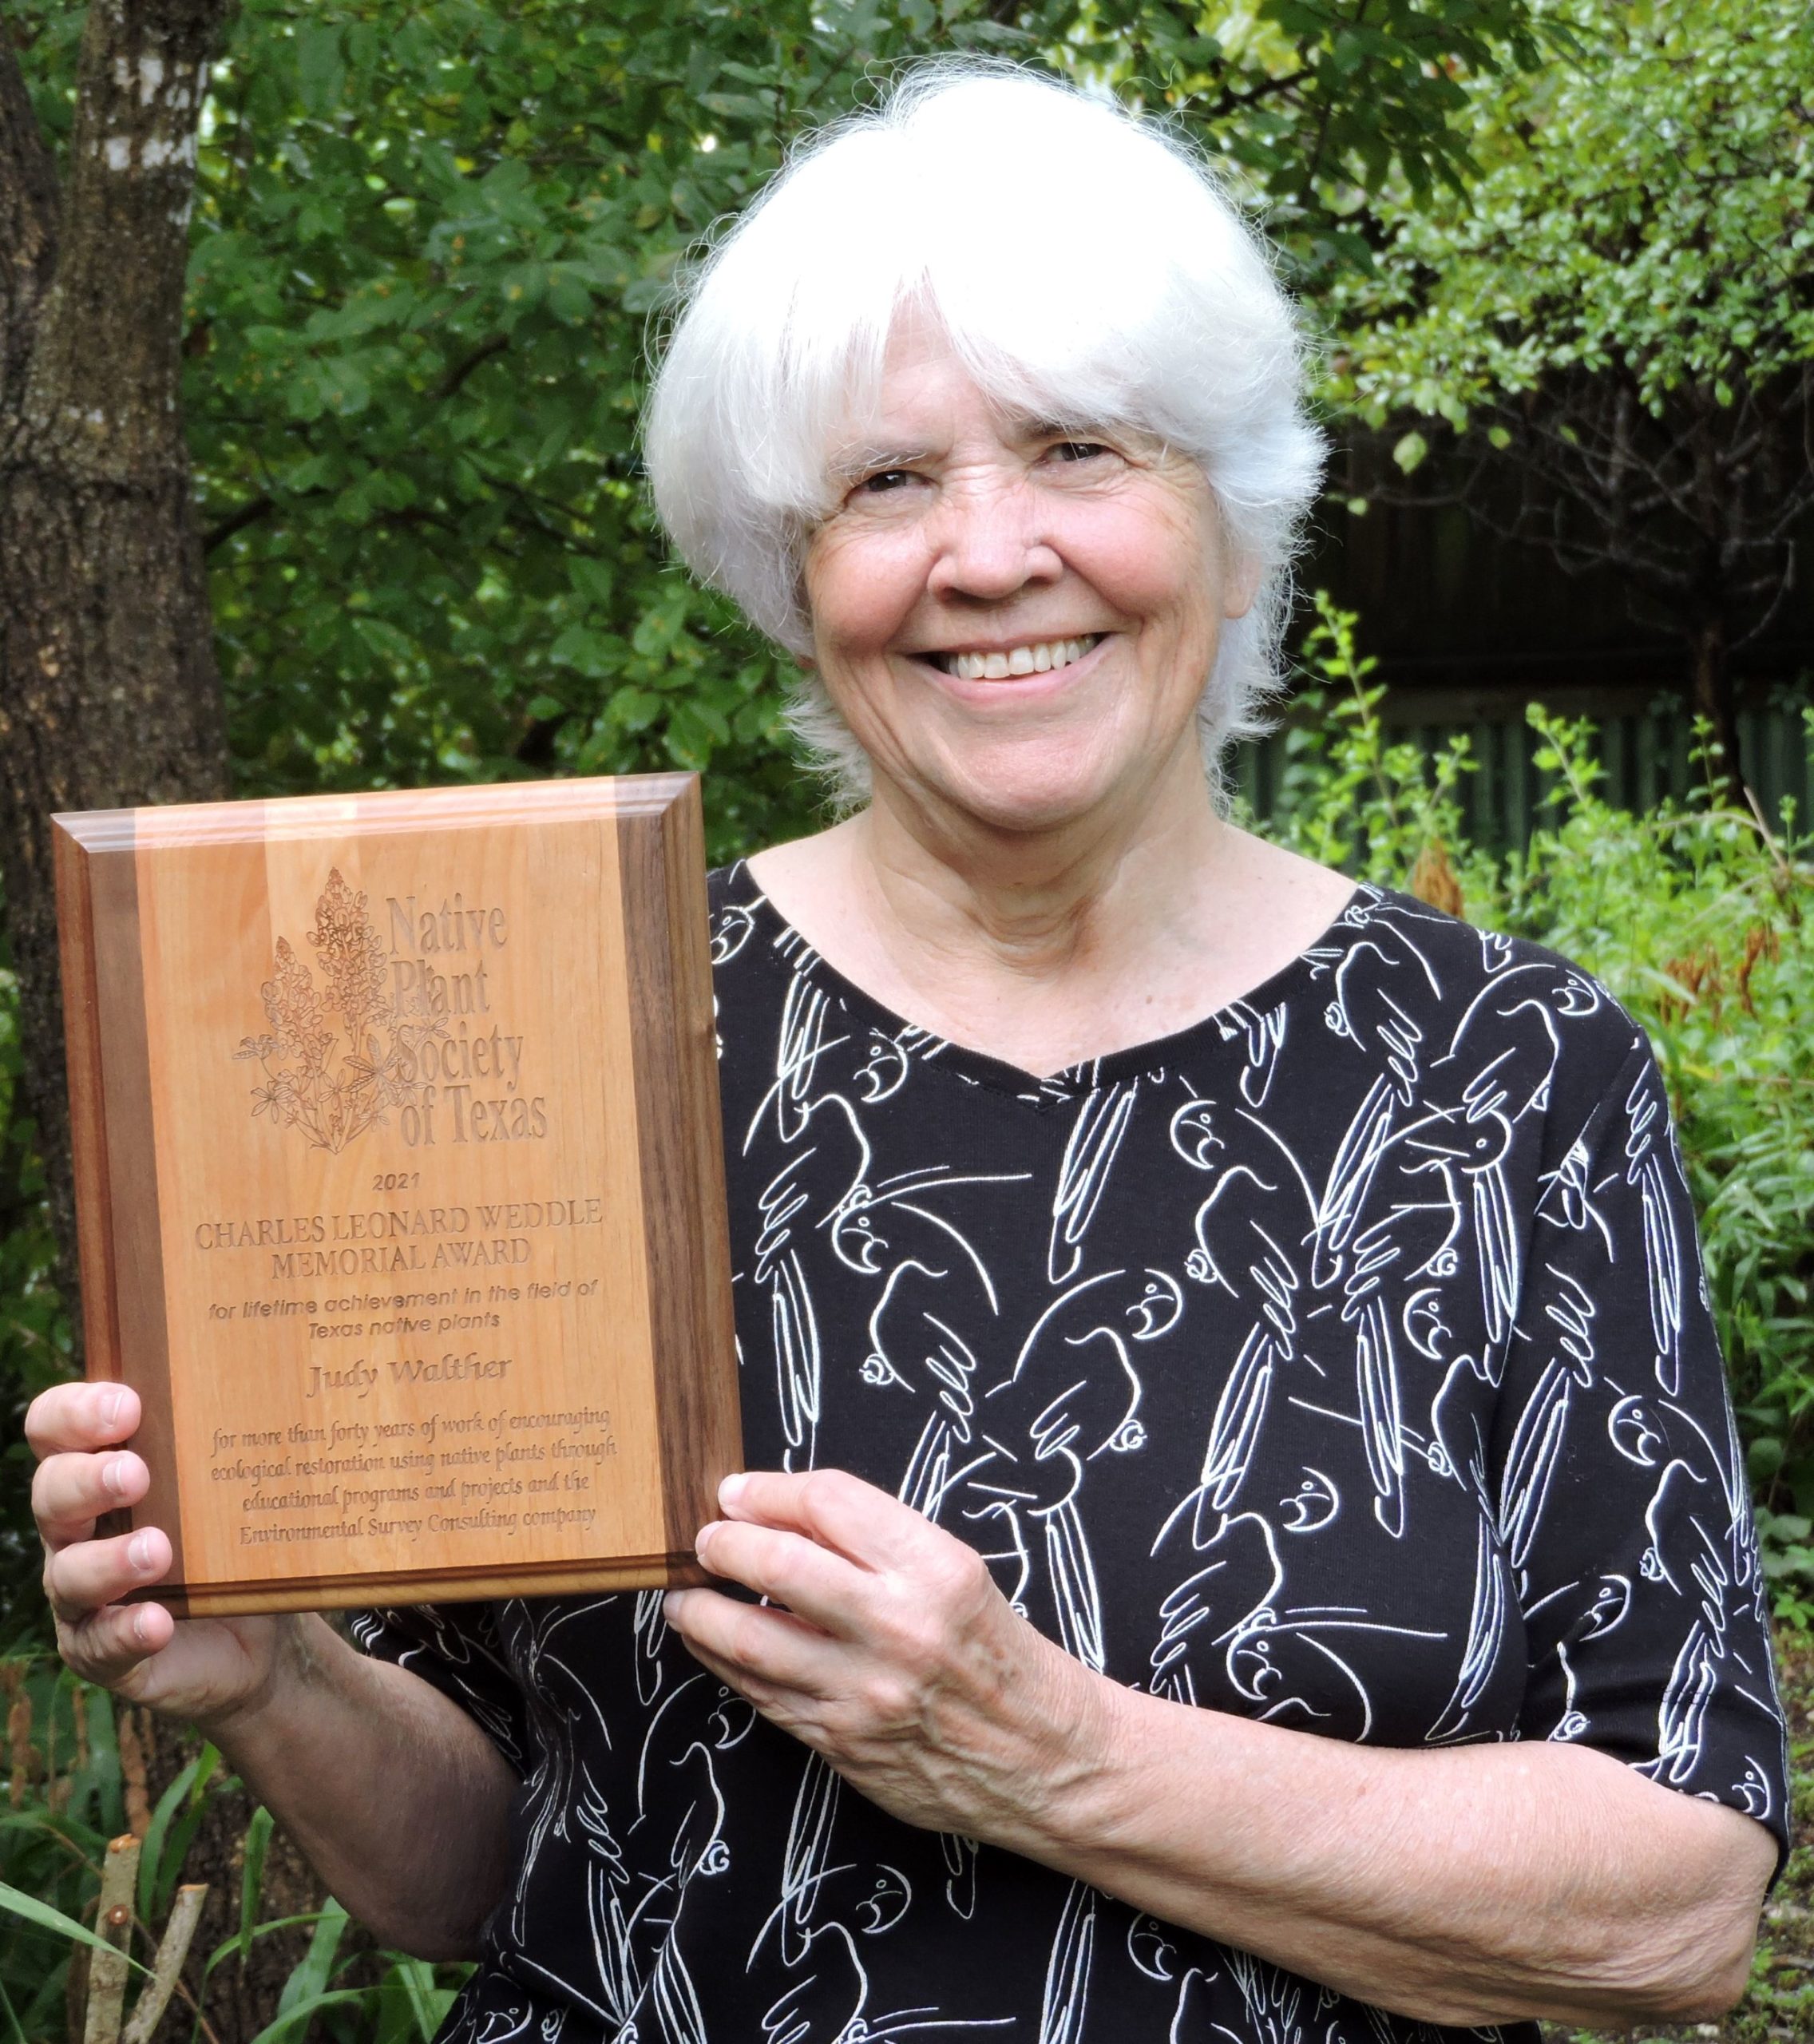 Judy Walther standing with NPSOT award in front of native trees and plants